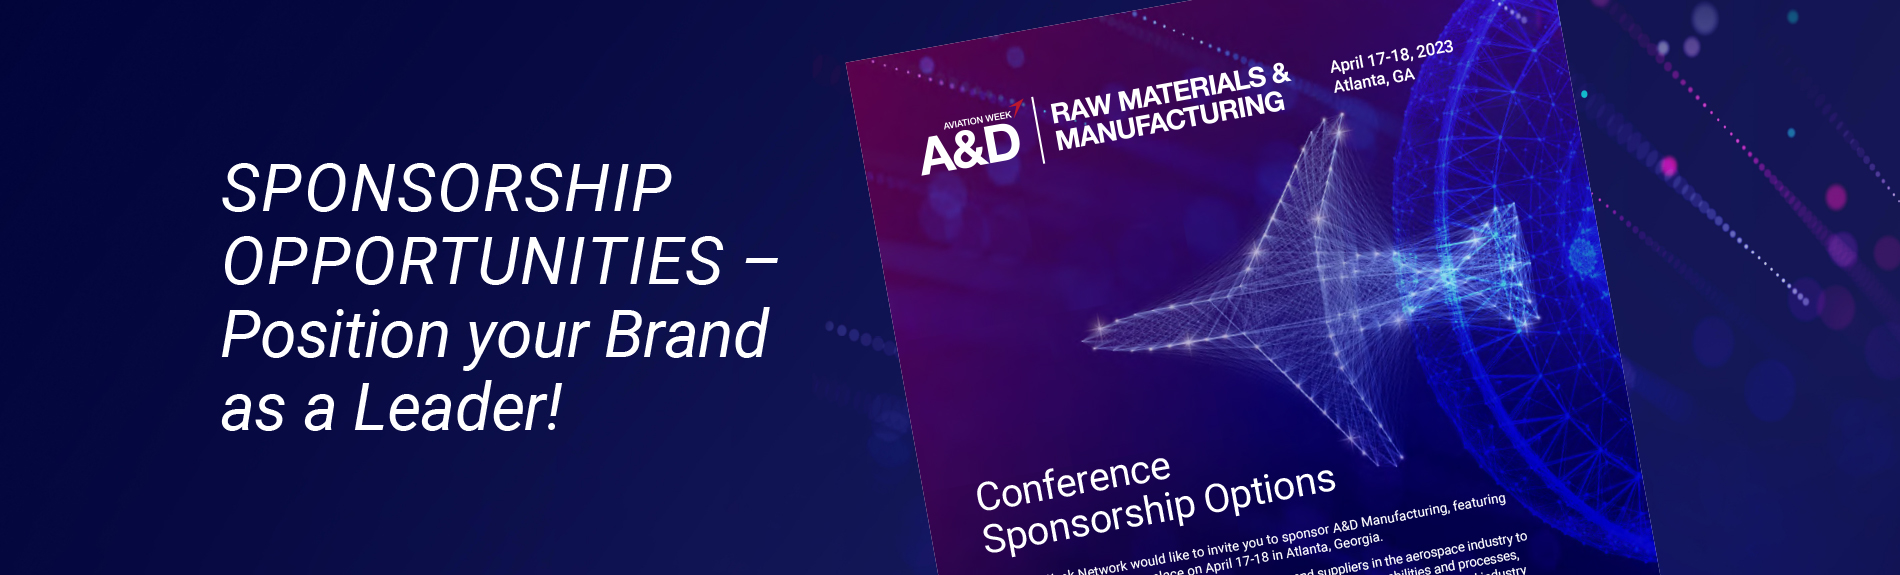 A&D Manufacturing Sponsorship Opportunities